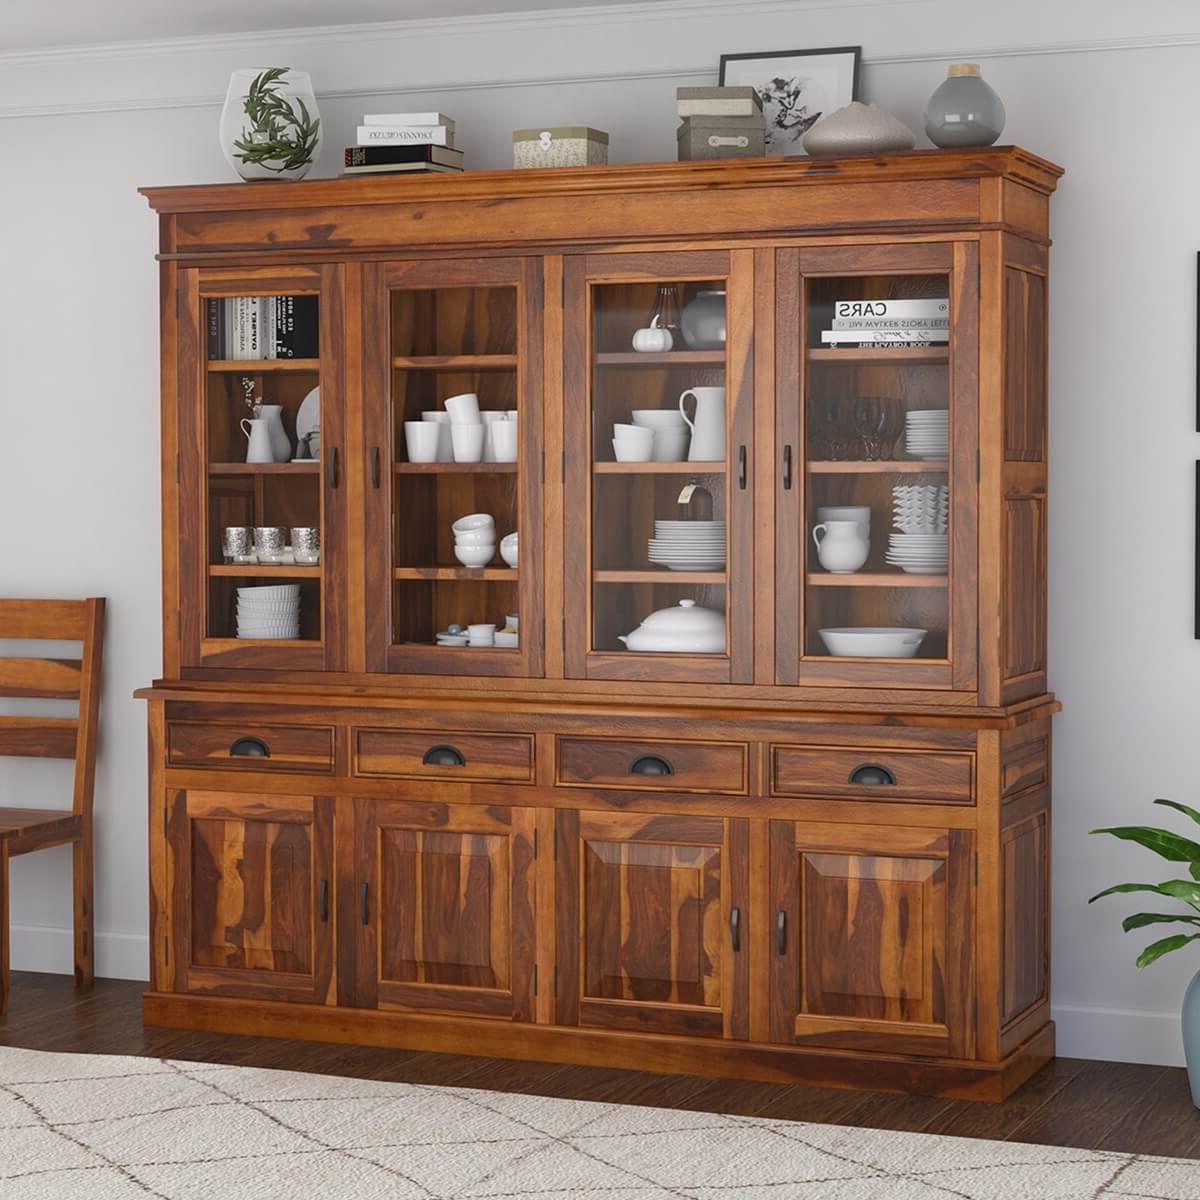 Popular Cariboo Contemporary Rustic Solid Wood Dining Room Large Buffet Hutch Inside Wide Buffet Cabinets For Dining Room (View 4 of 15)